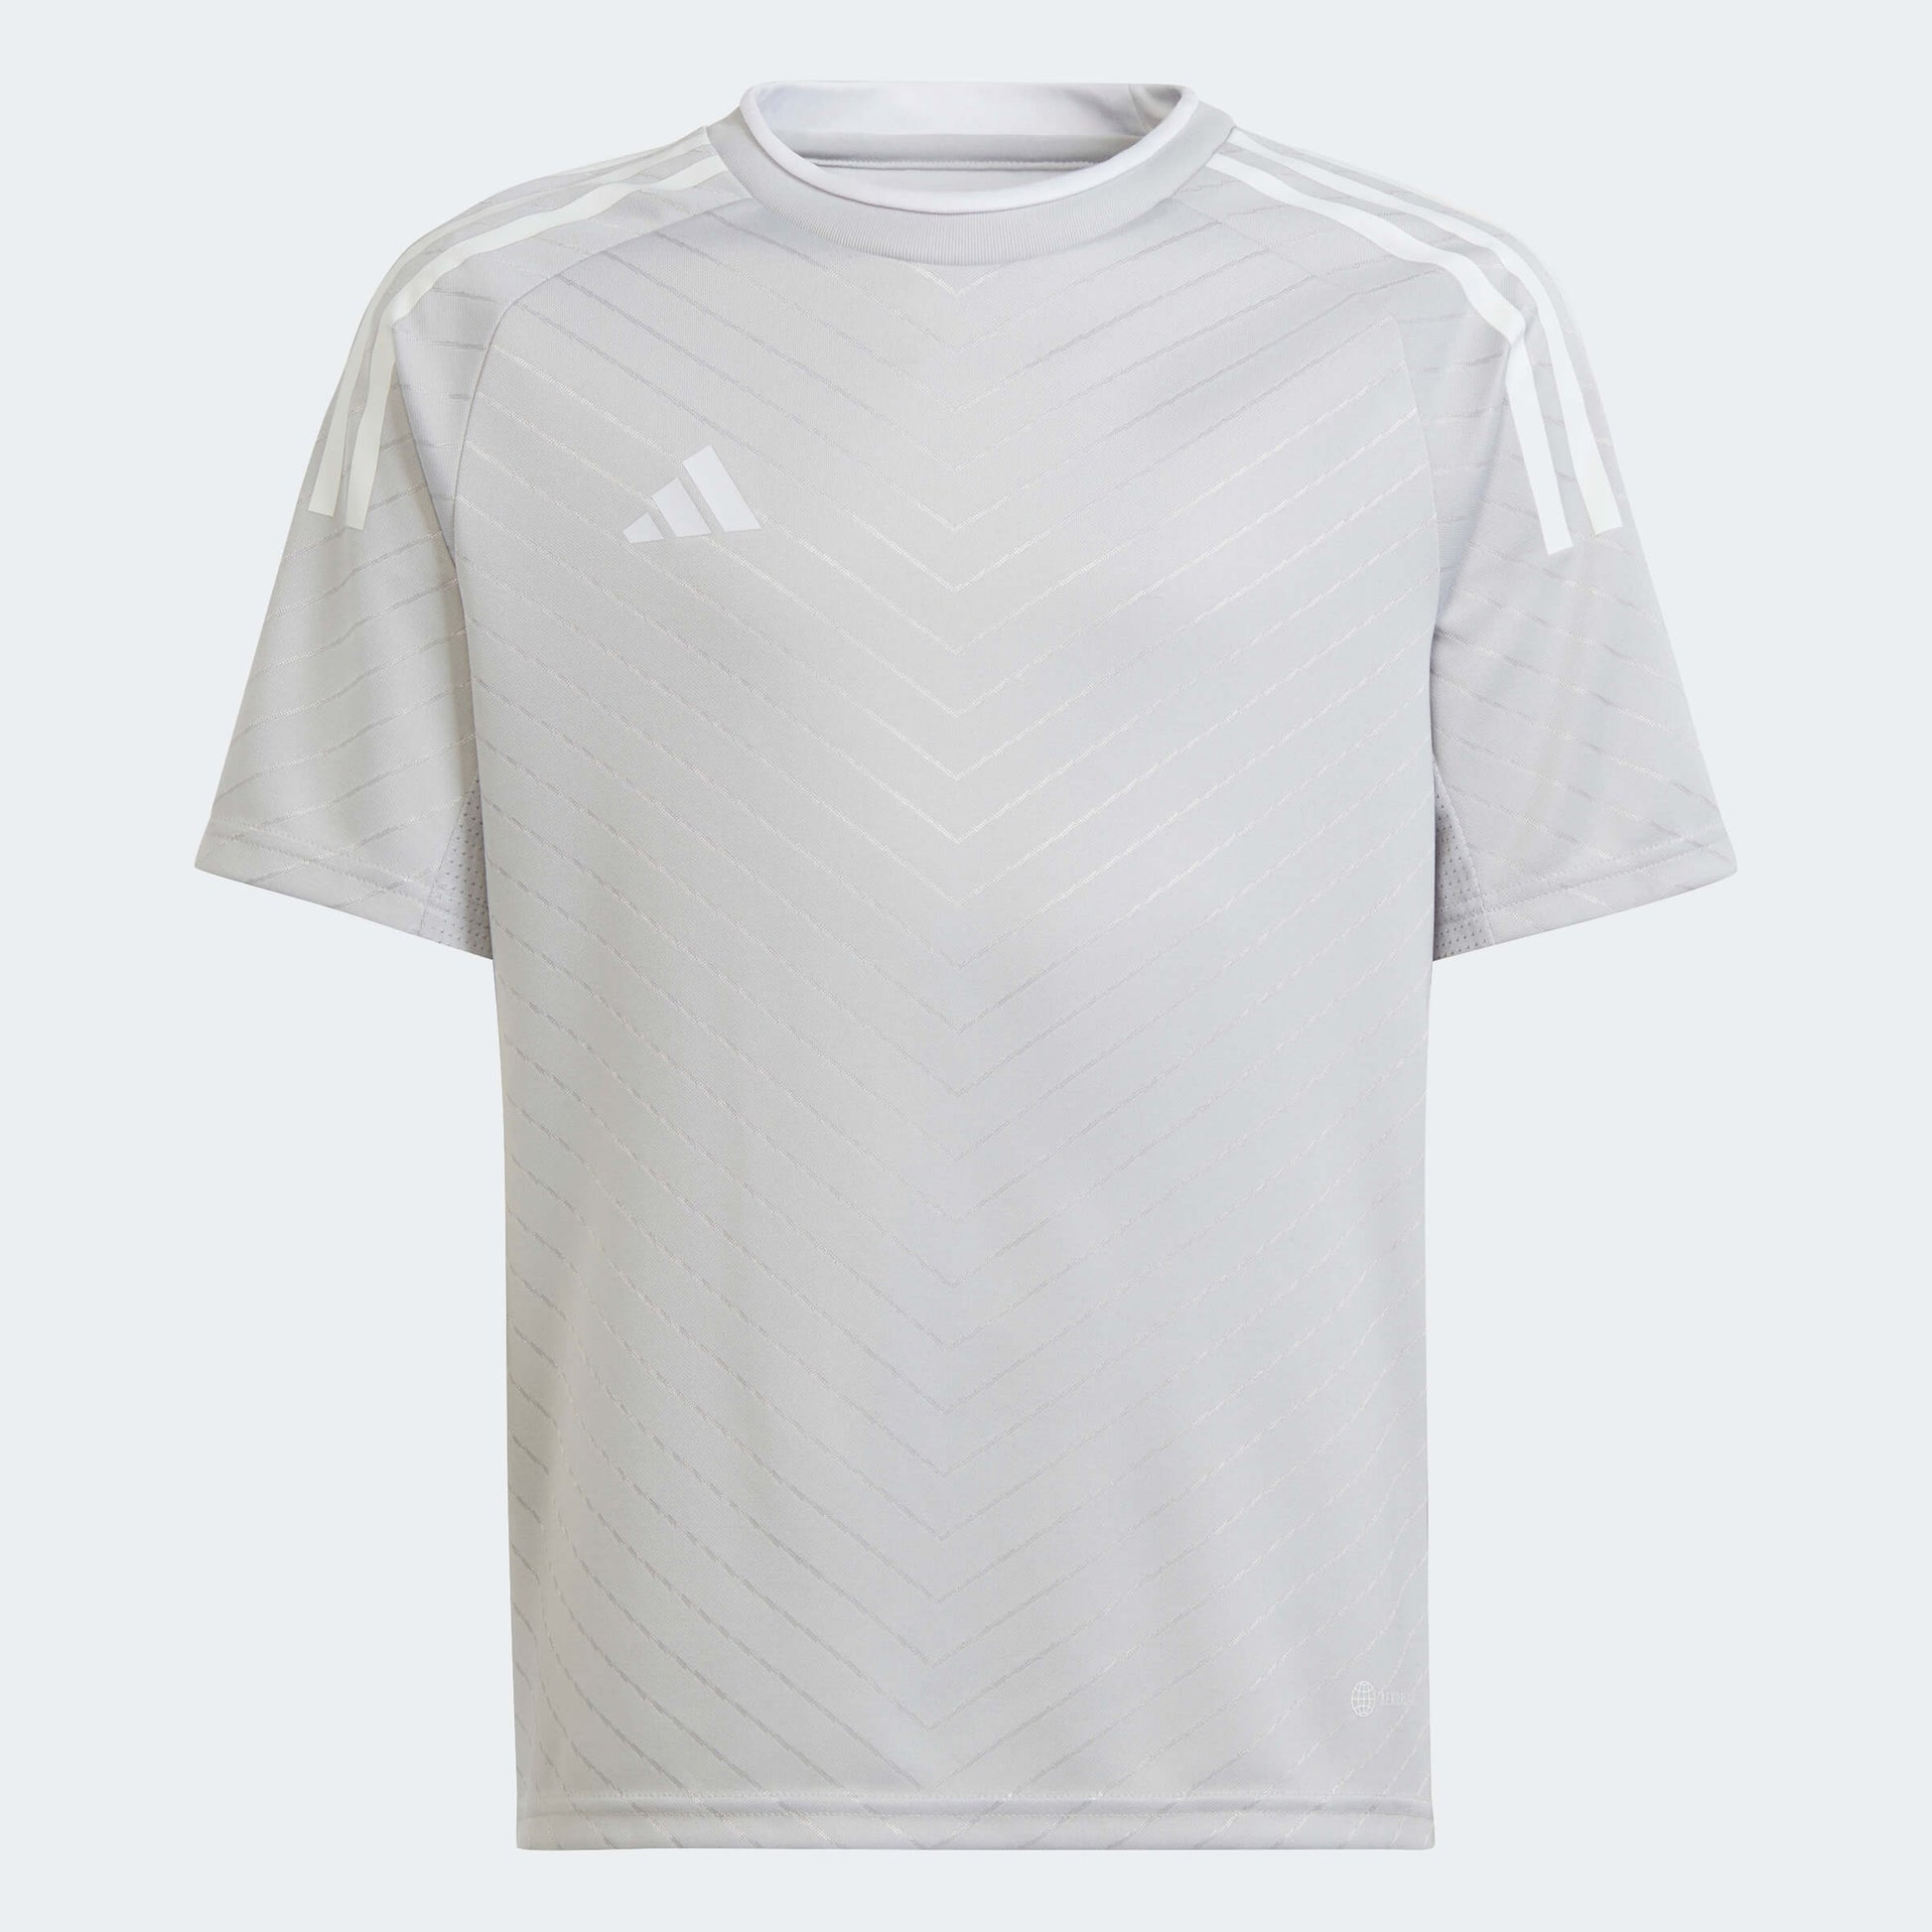 adidas YOUTH Campeon 23 Jersey Team Light Grey (Front)